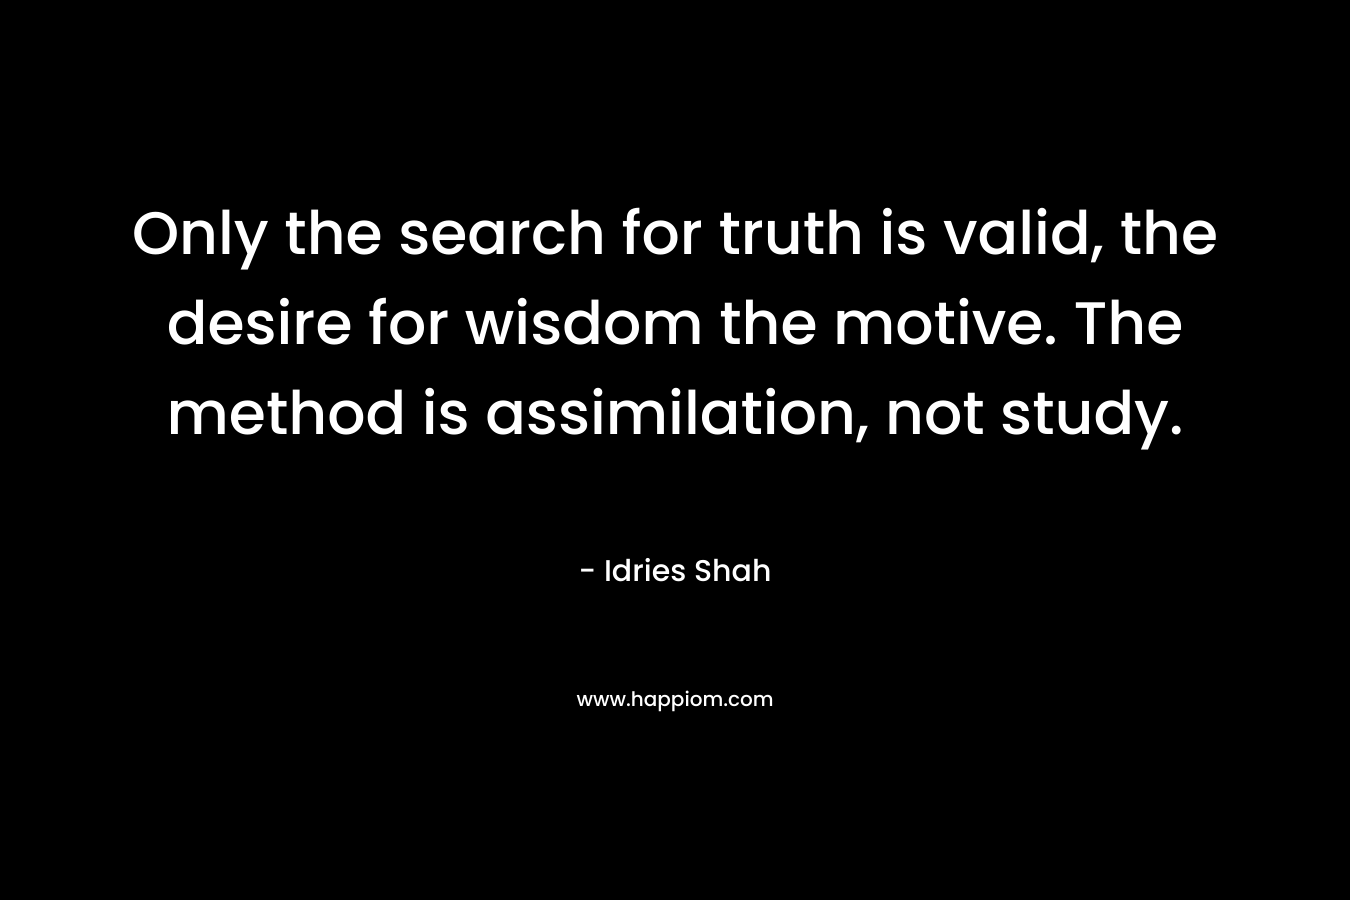 Only the search for truth is valid, the desire for wisdom the motive. The method is assimilation, not study. – Idries Shah